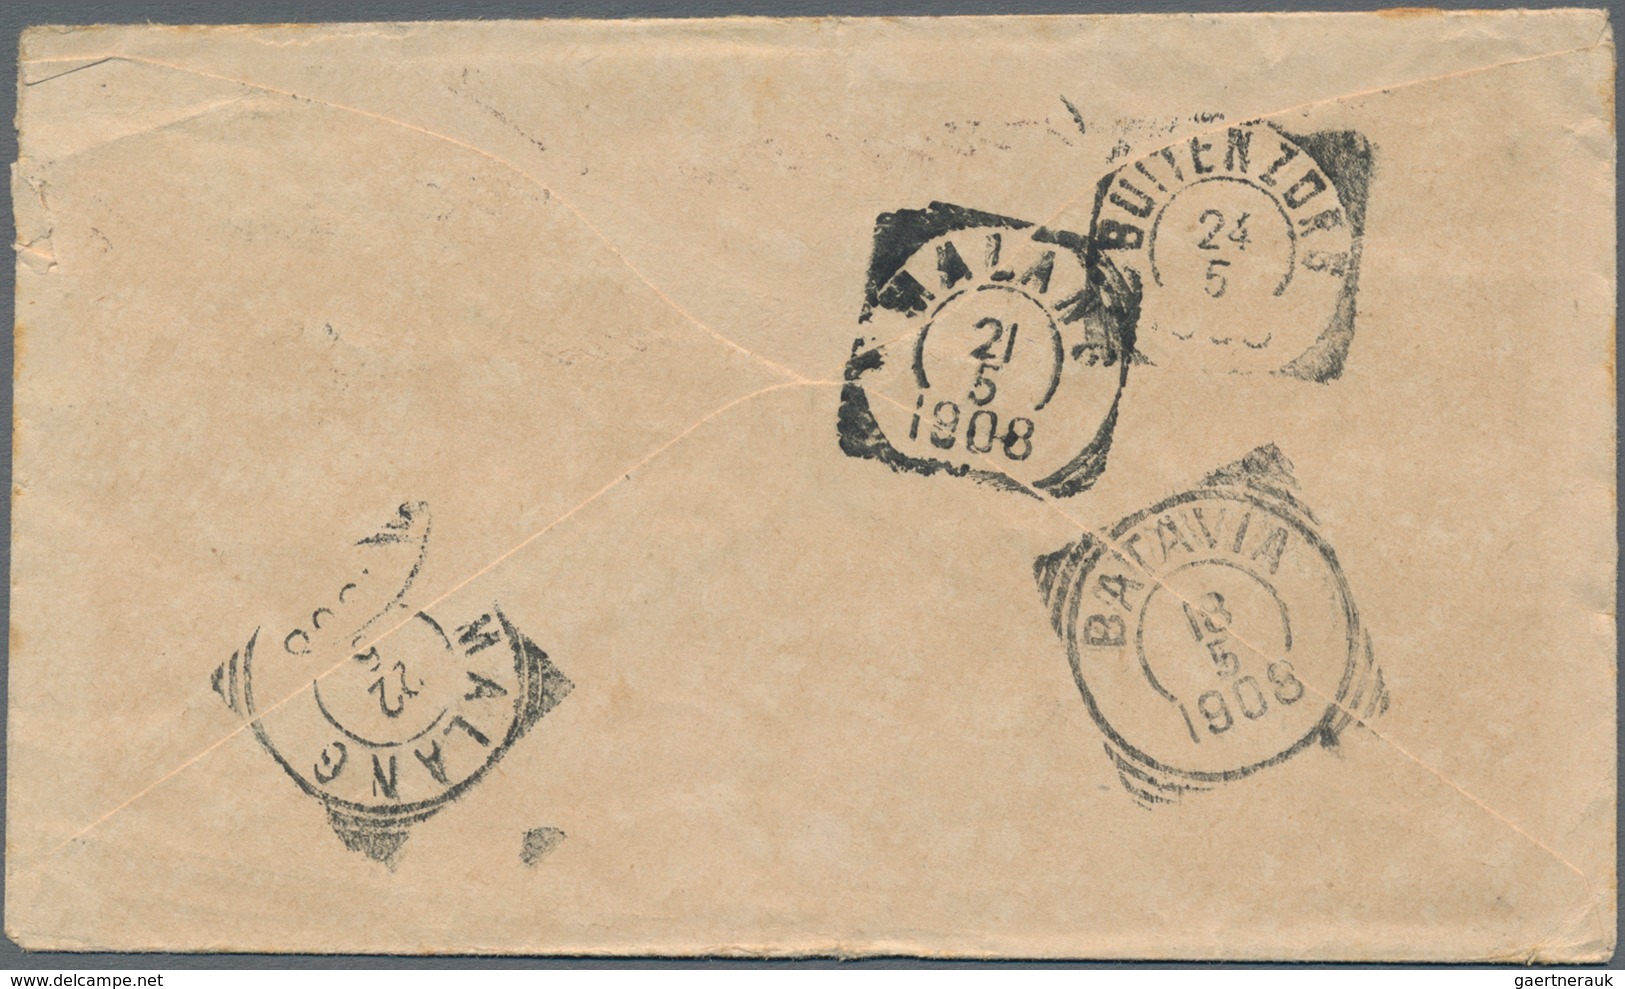 Bahamas: 1908, ½d Green Tied "TOBAGO AP 4 8" To Unsealed Envelope Endorsed "Printed Matter" To Malan - 1963-1973 Ministerial Government